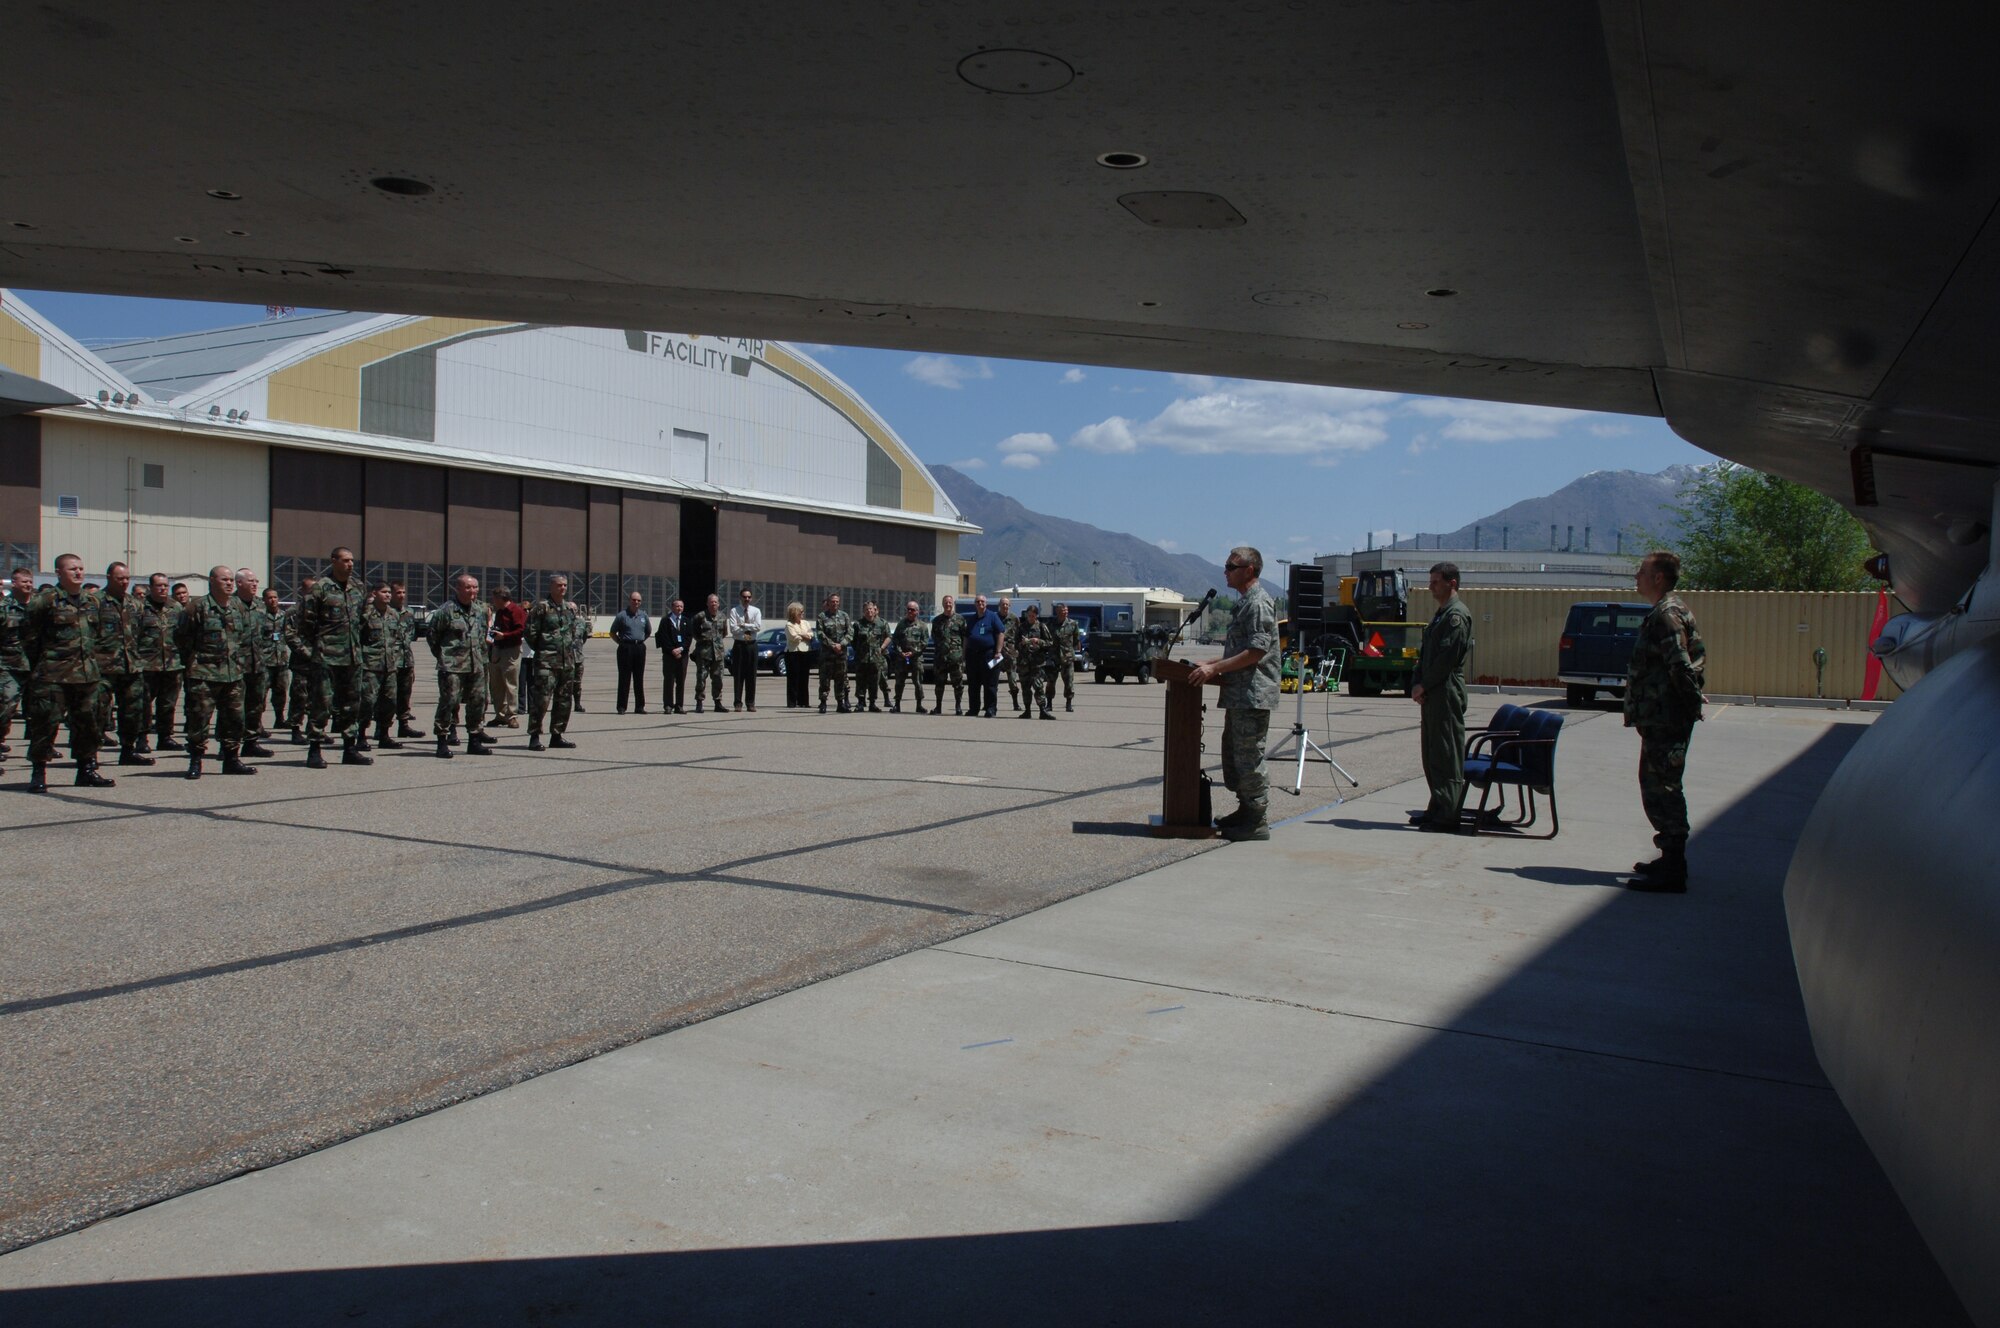 Brig. Gen. Art Cameron, 309th Maintenance Wing commander, addresses the group during the official handing over ceremony of an F-16 that received extensive damage repair from the 309th. The F-16 was handed over to the 388th Fighter Wing May 7. (U.S. Air Force photo by Alex Lloyd)